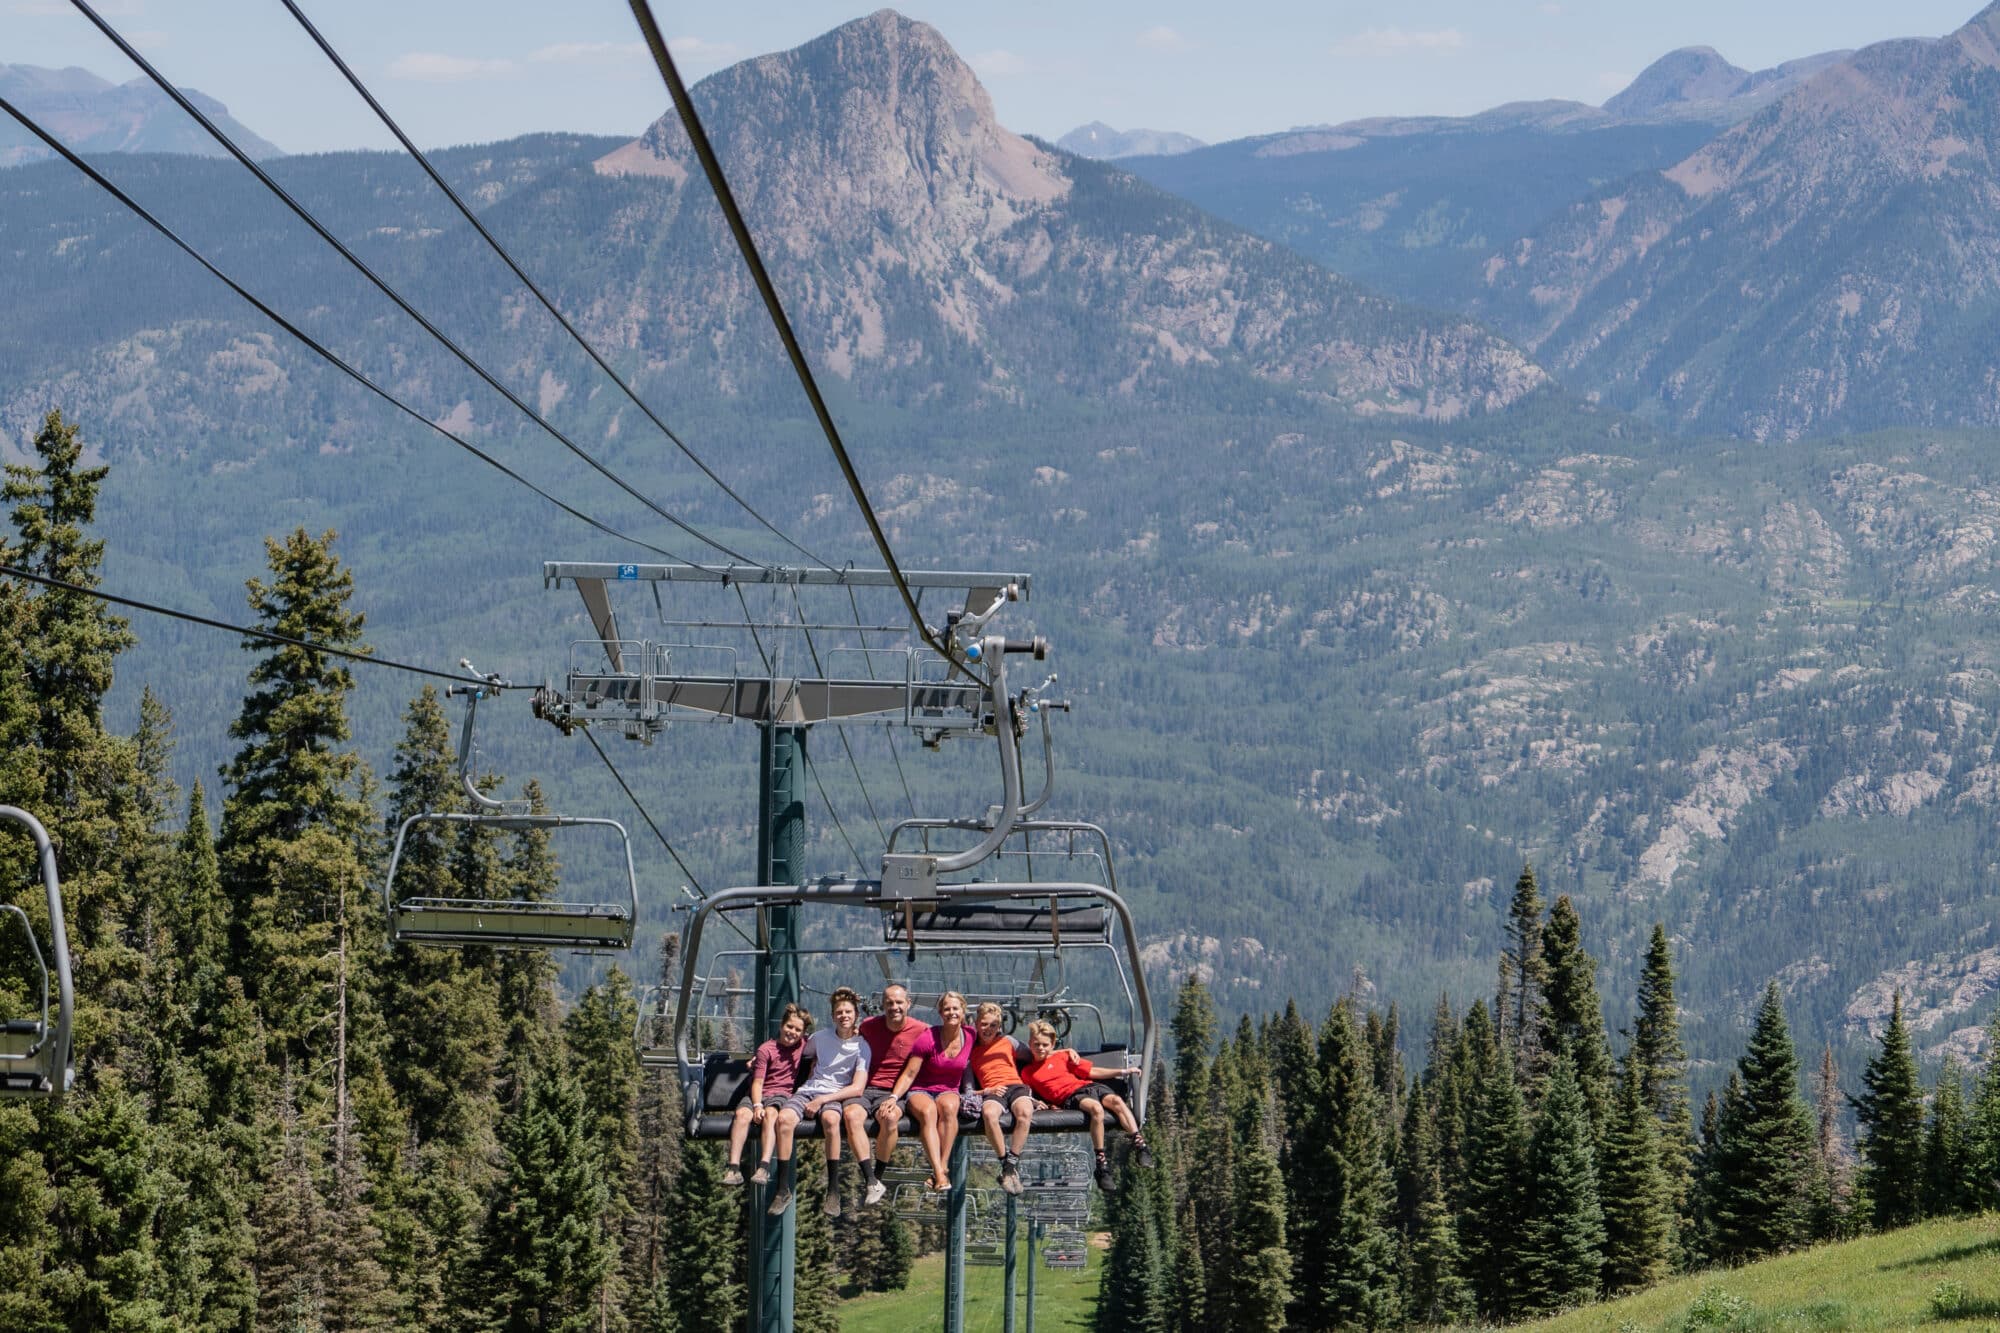 Family rides up the scenic chairlift with Potato Hill in the background